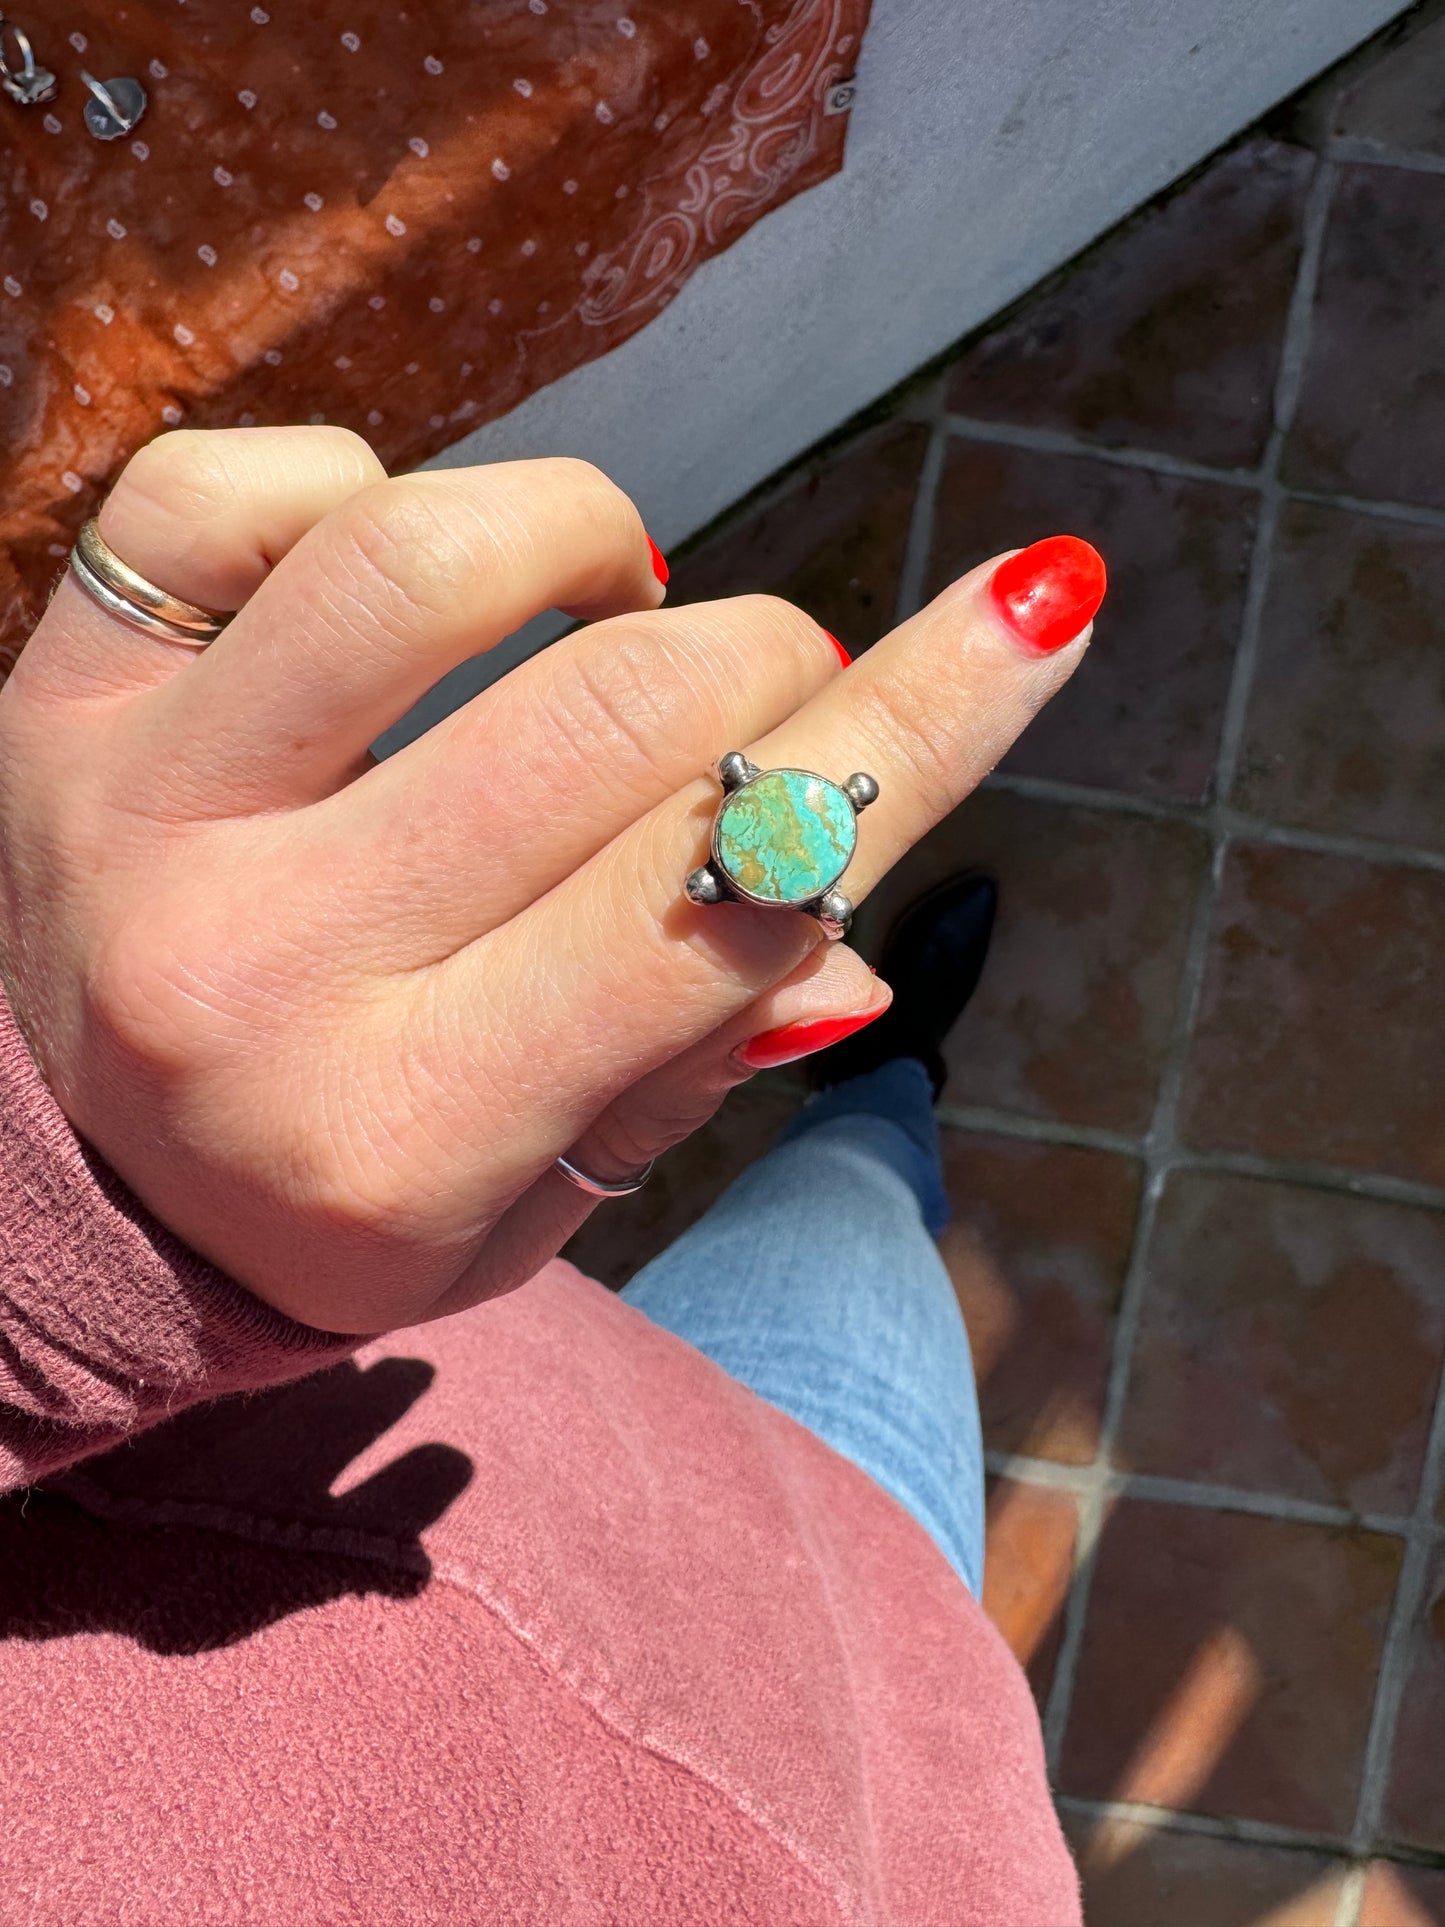 Turquoise "Waypoint" Ring - Size 5 1/4